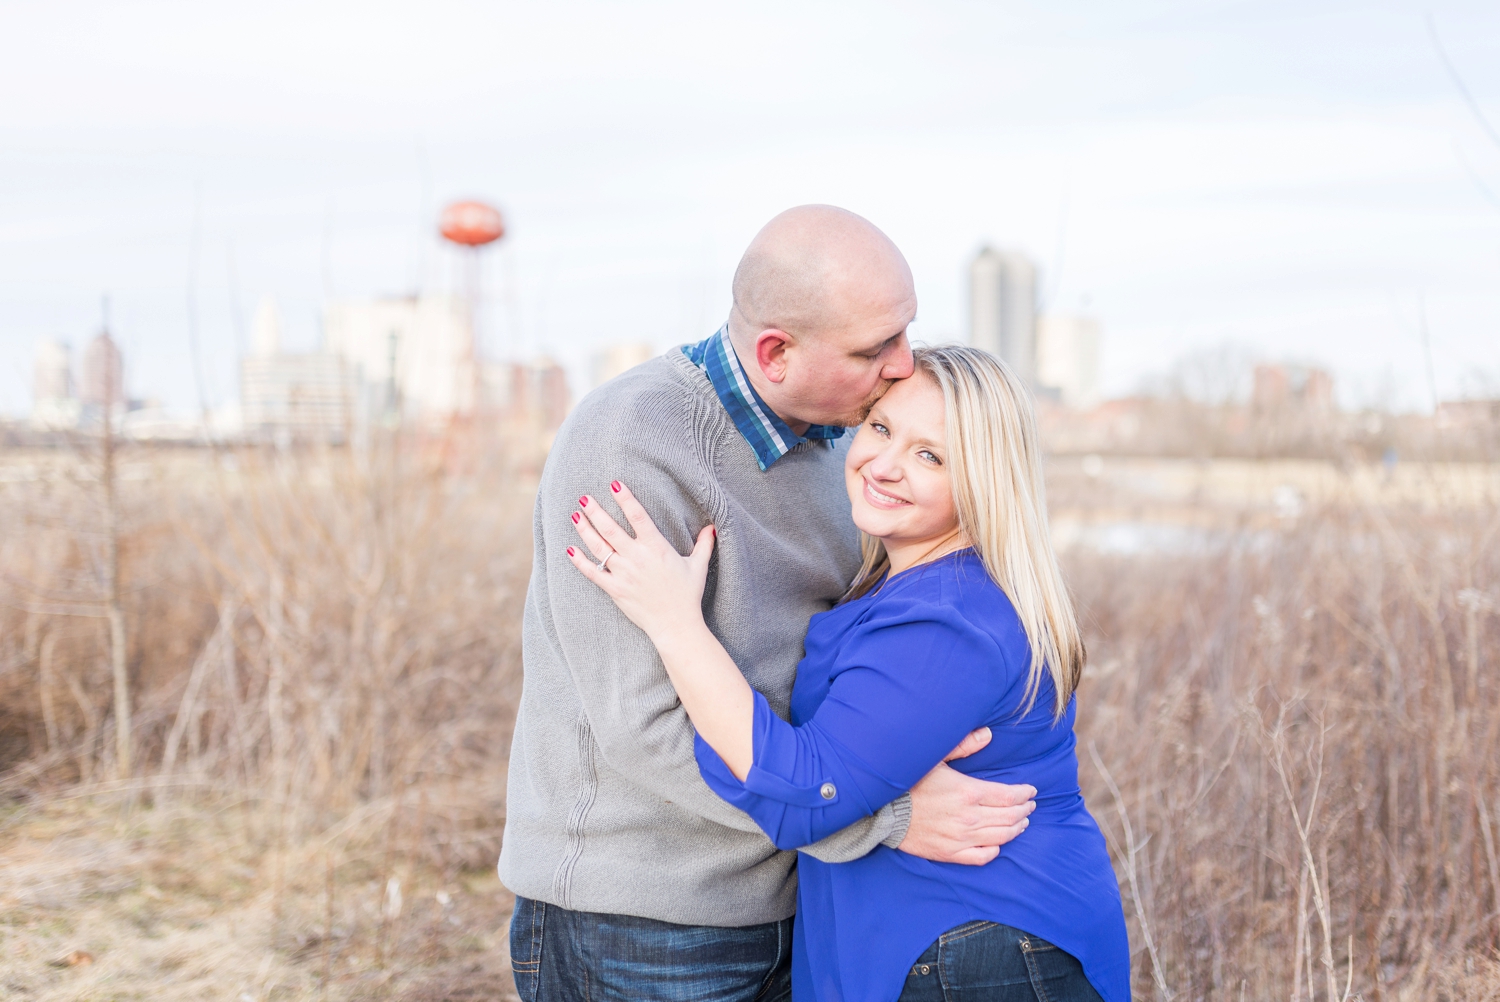 winter-engaged-couple-at-their-photo-session-at-the-scioto-audubon-park-near-grange-audubon-center-with-walkways-and-grass_0342